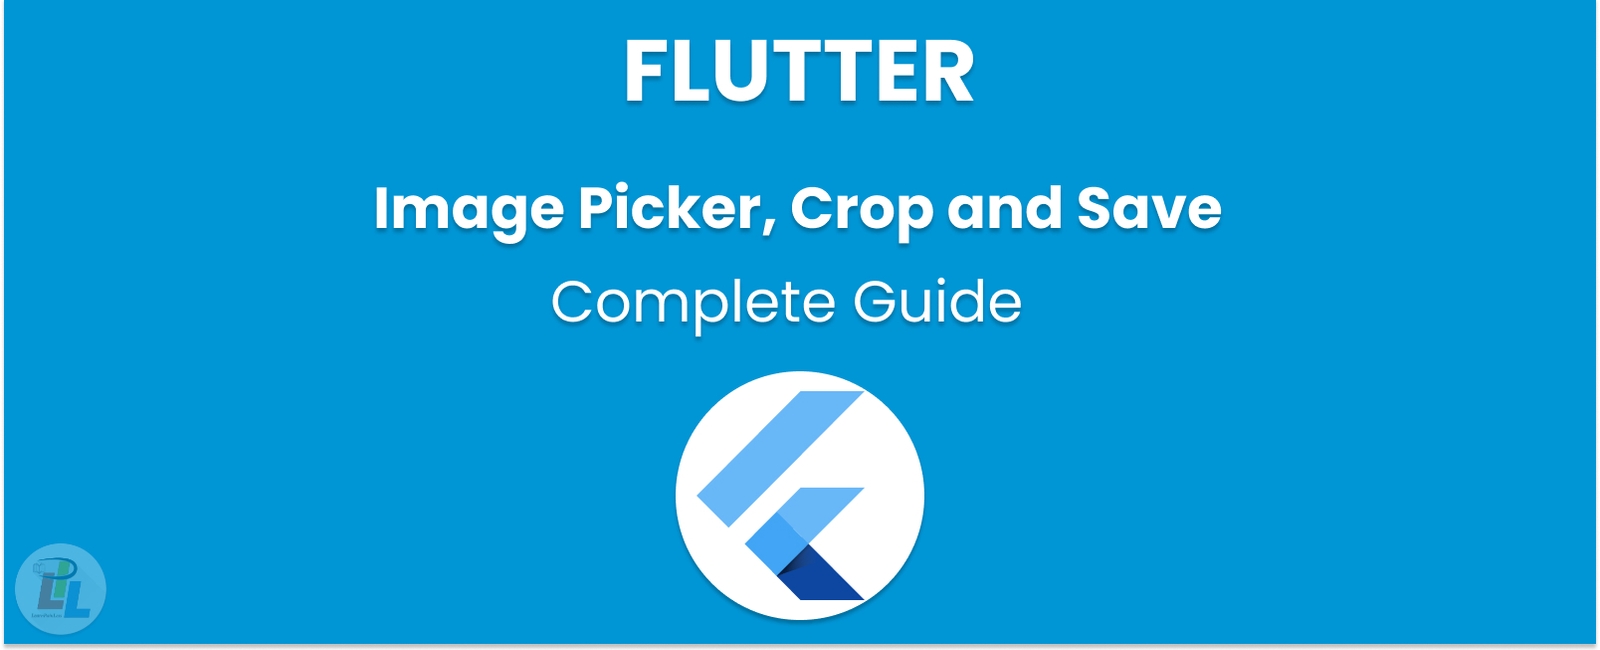 How to Open Image with Image Picker, Crop and Save in Flutter